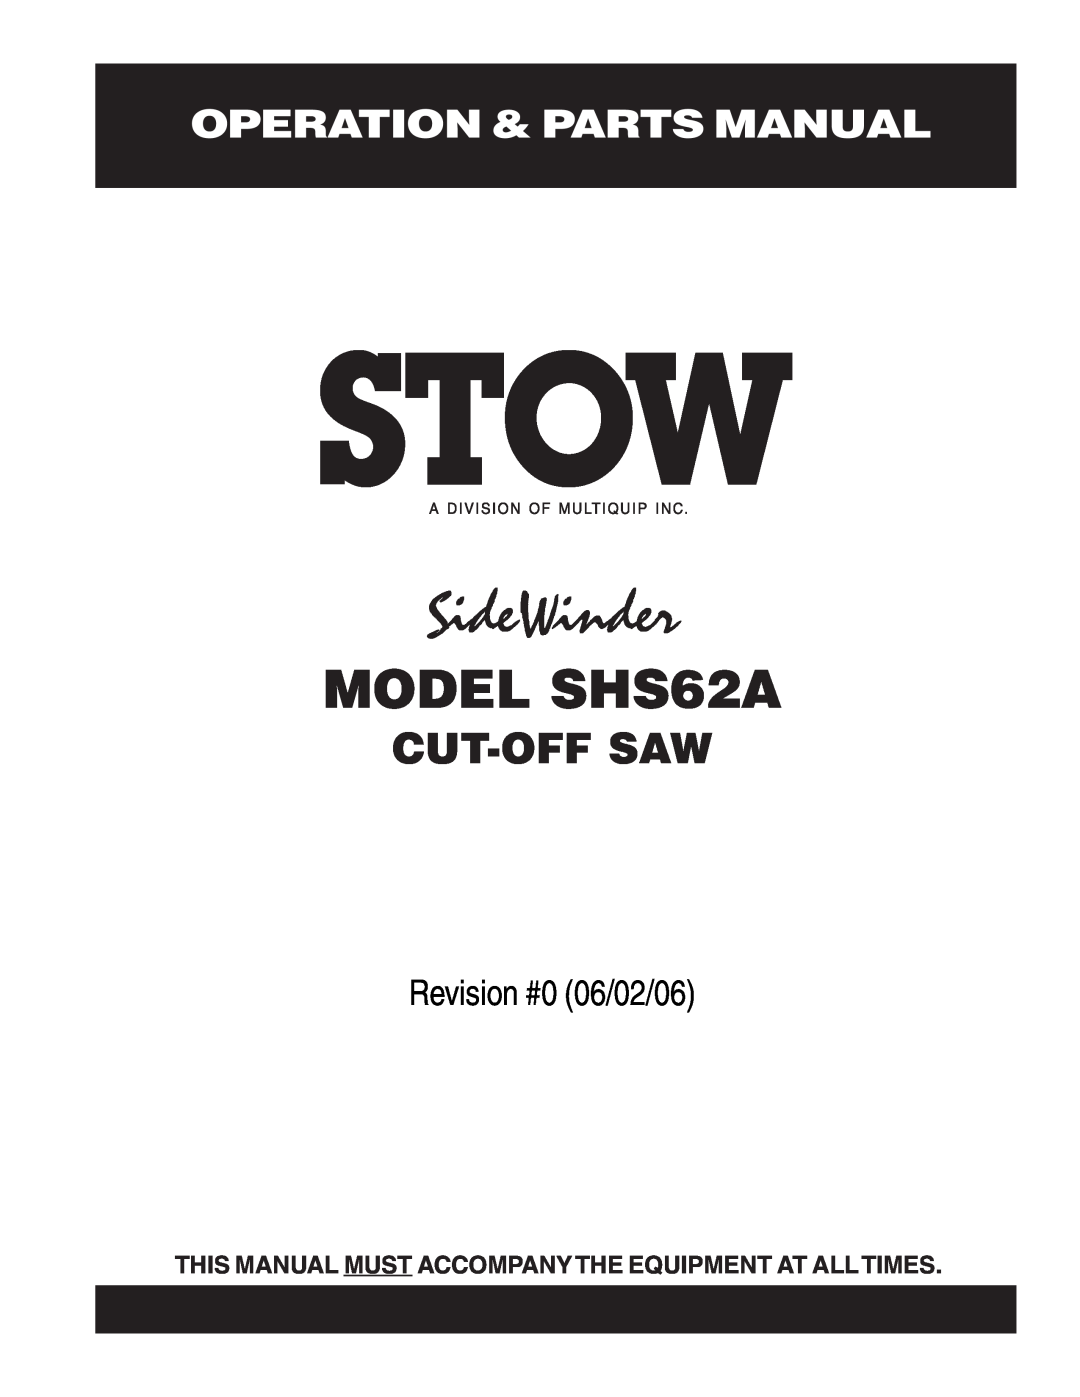 Stow manual Operation & Parts Manual, SideWinder, MODEL SHS62A, Cut-Off Saw, Revision #0 06/02/06 